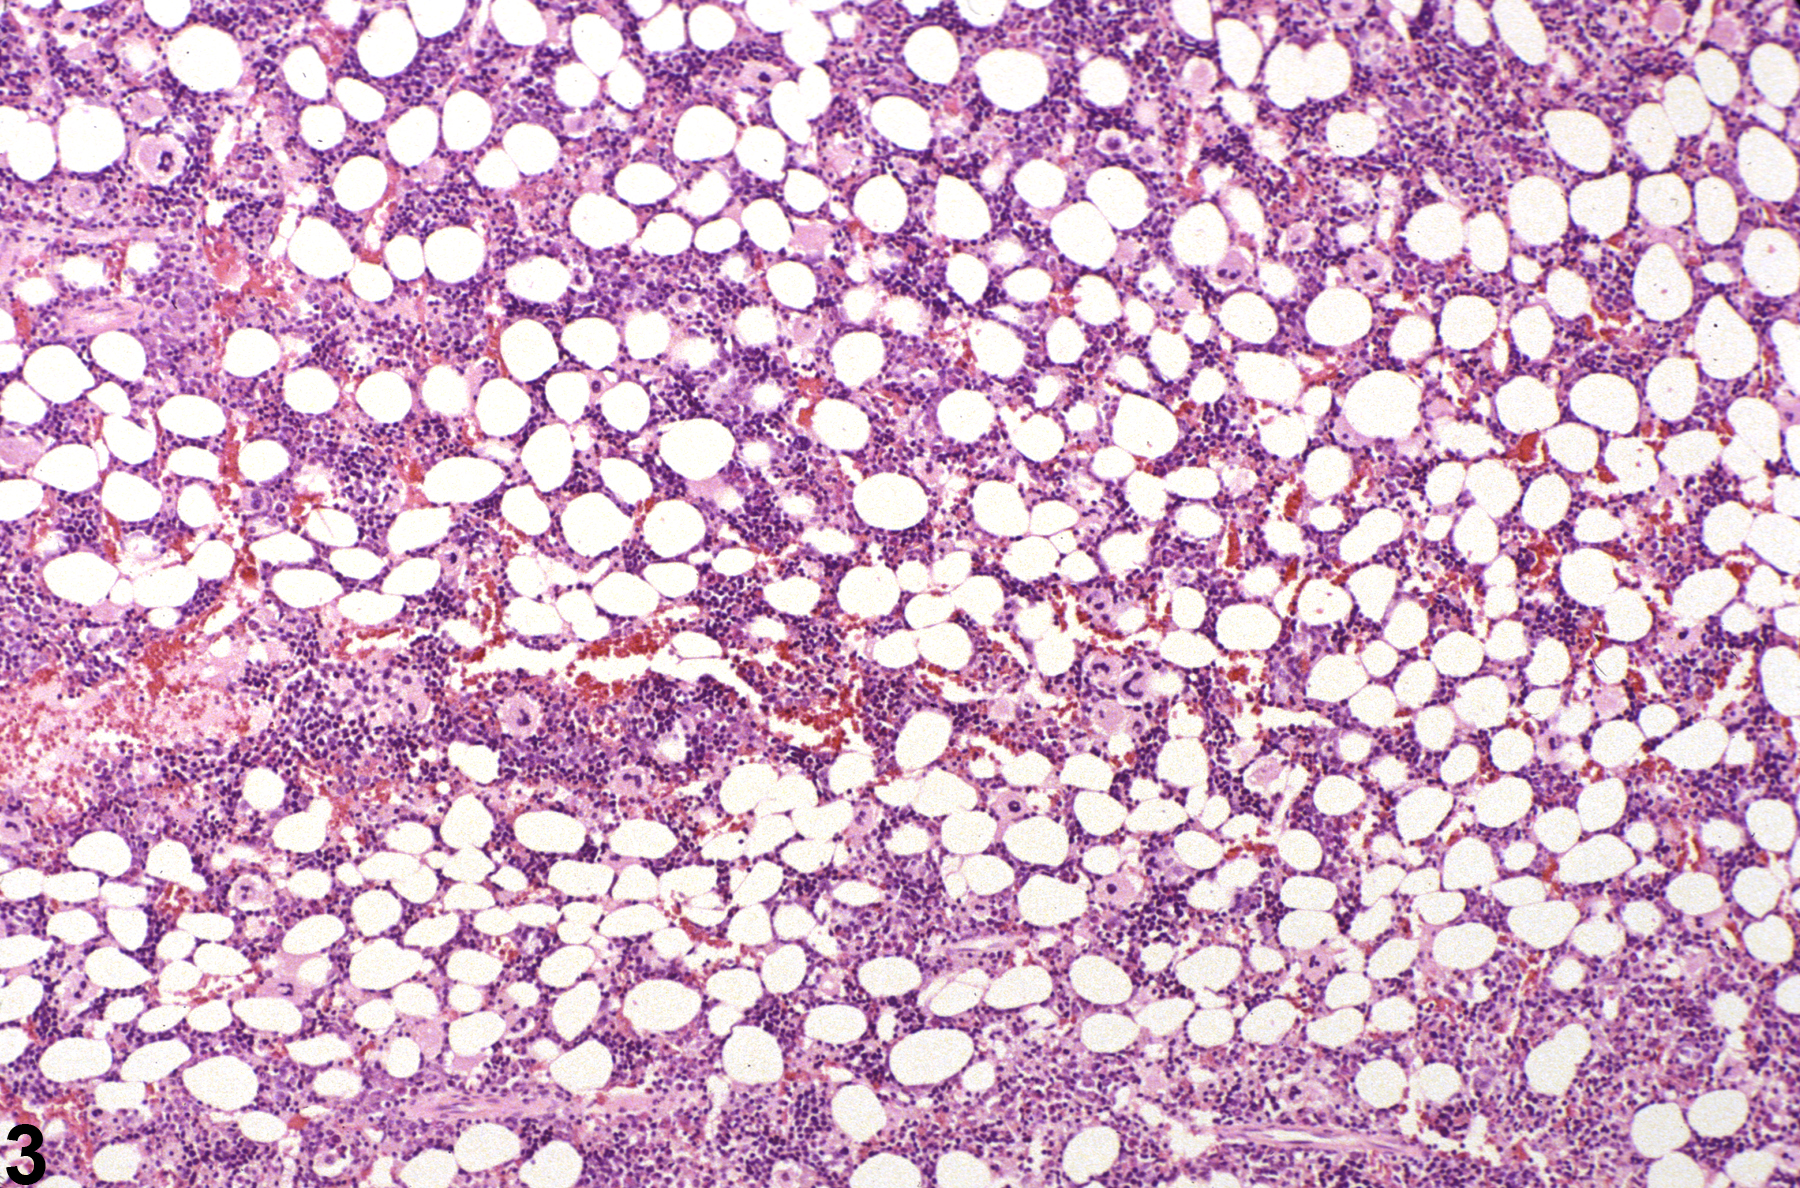 Image of hypocellularity (normal comparison) in the bone marrow from a female F344/N rat in a subchronic study